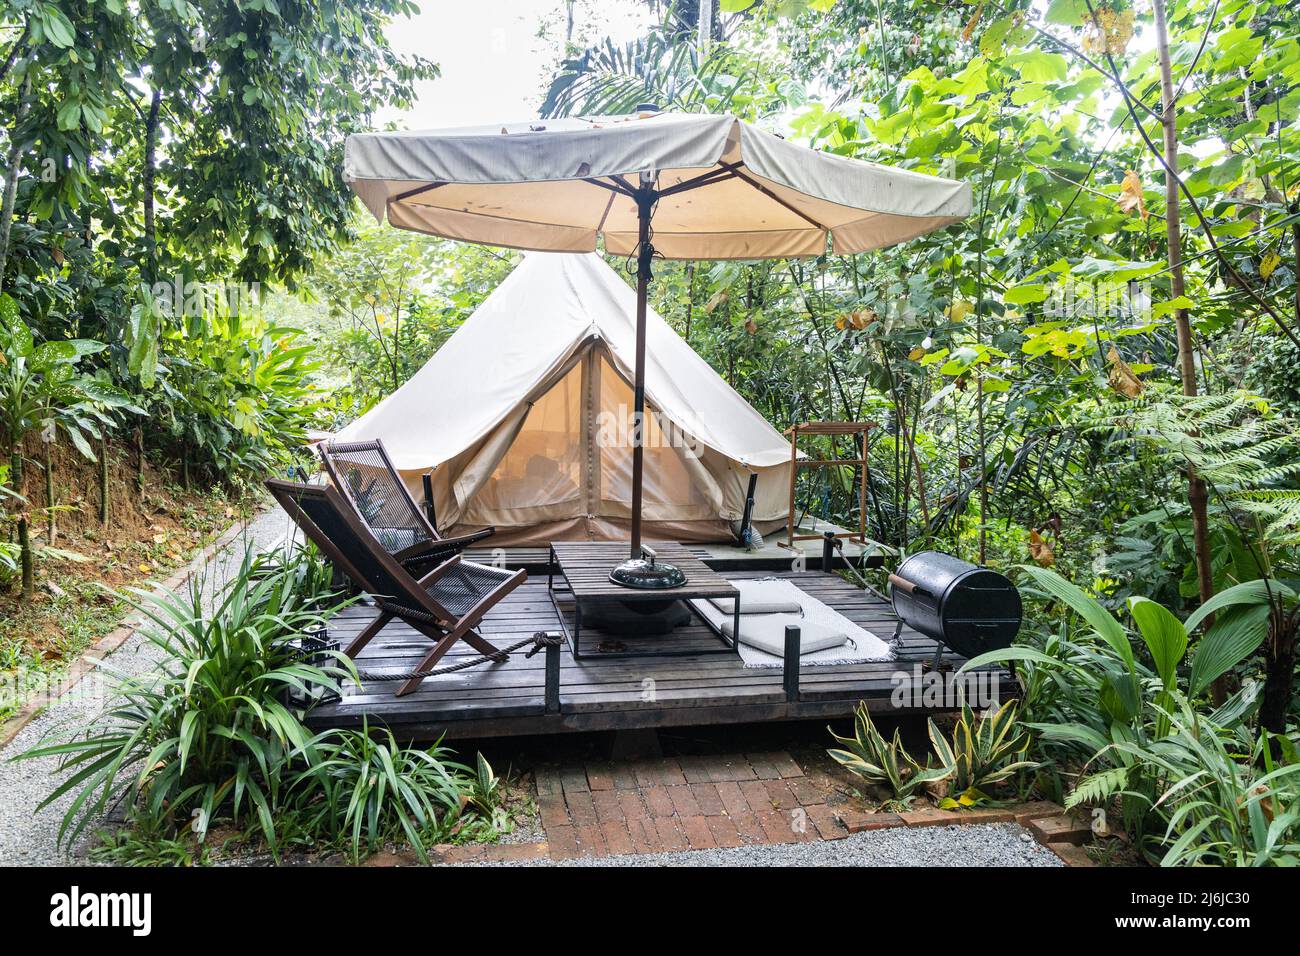 Luxury glamping tent on wooden deck lifestyle in the tropical woods Stock Photo